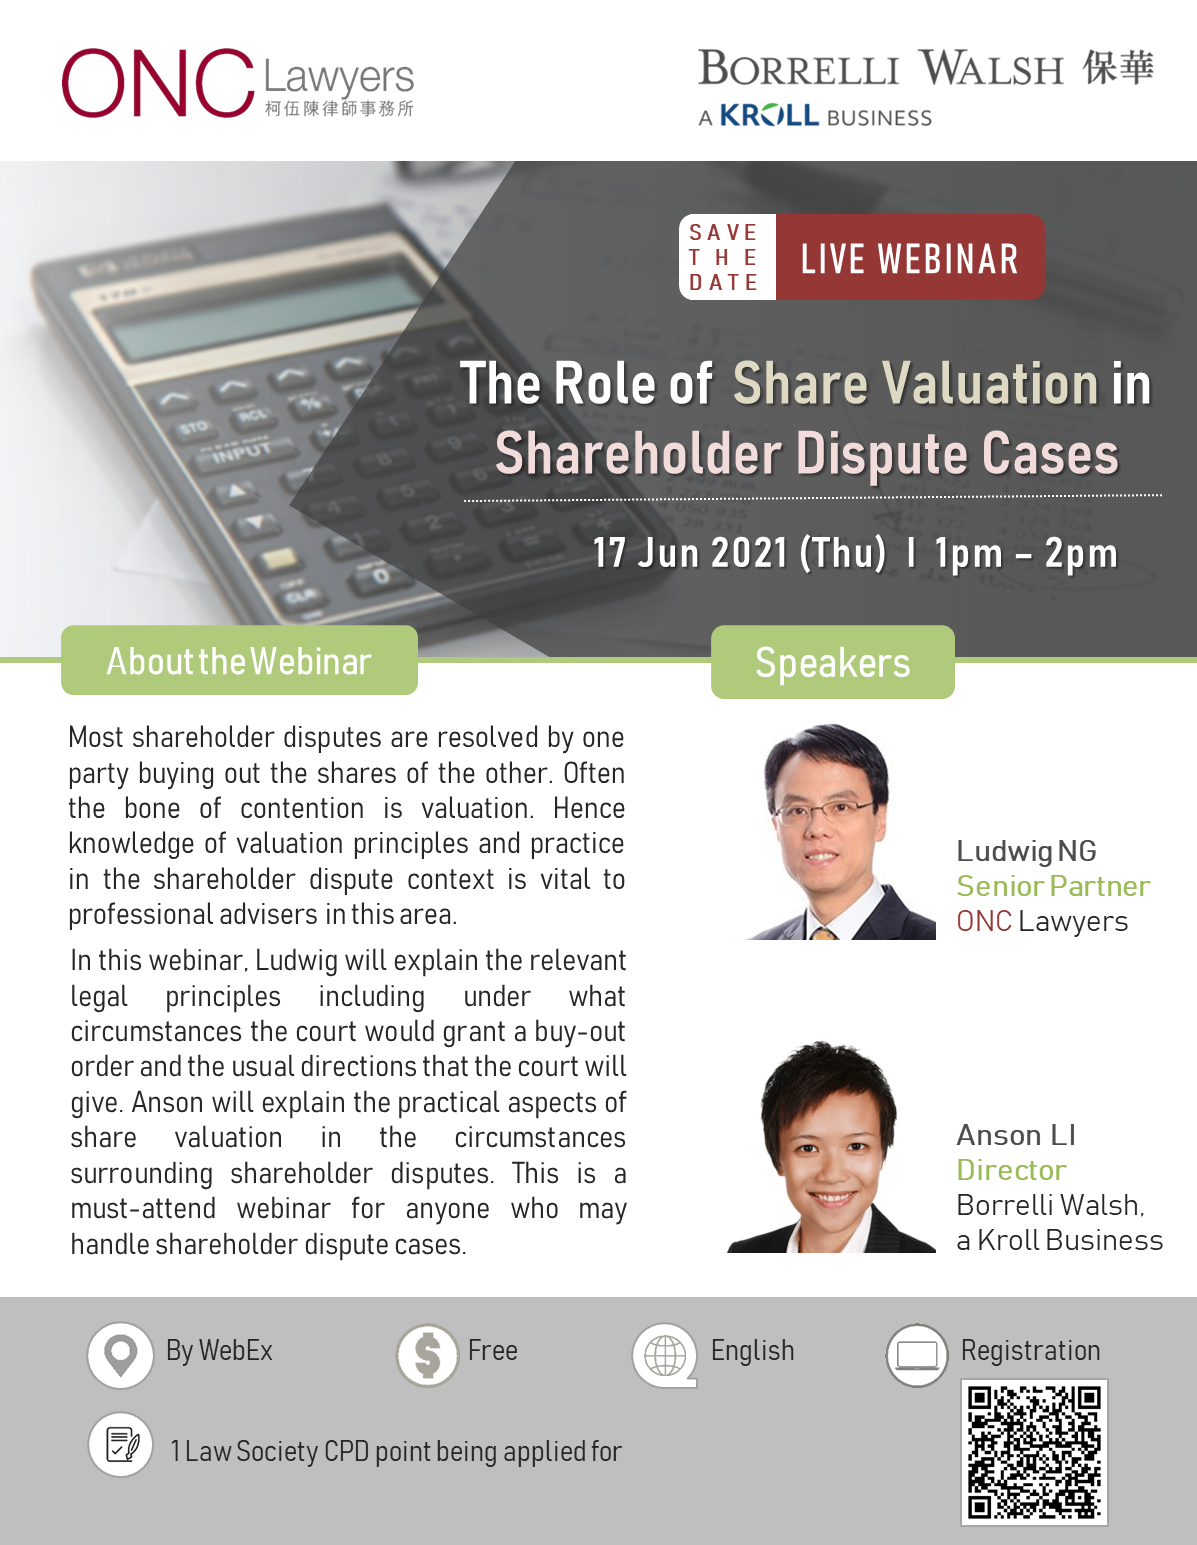 Webinar on The Role of Share Valuation in Shareholder Dispute Cases